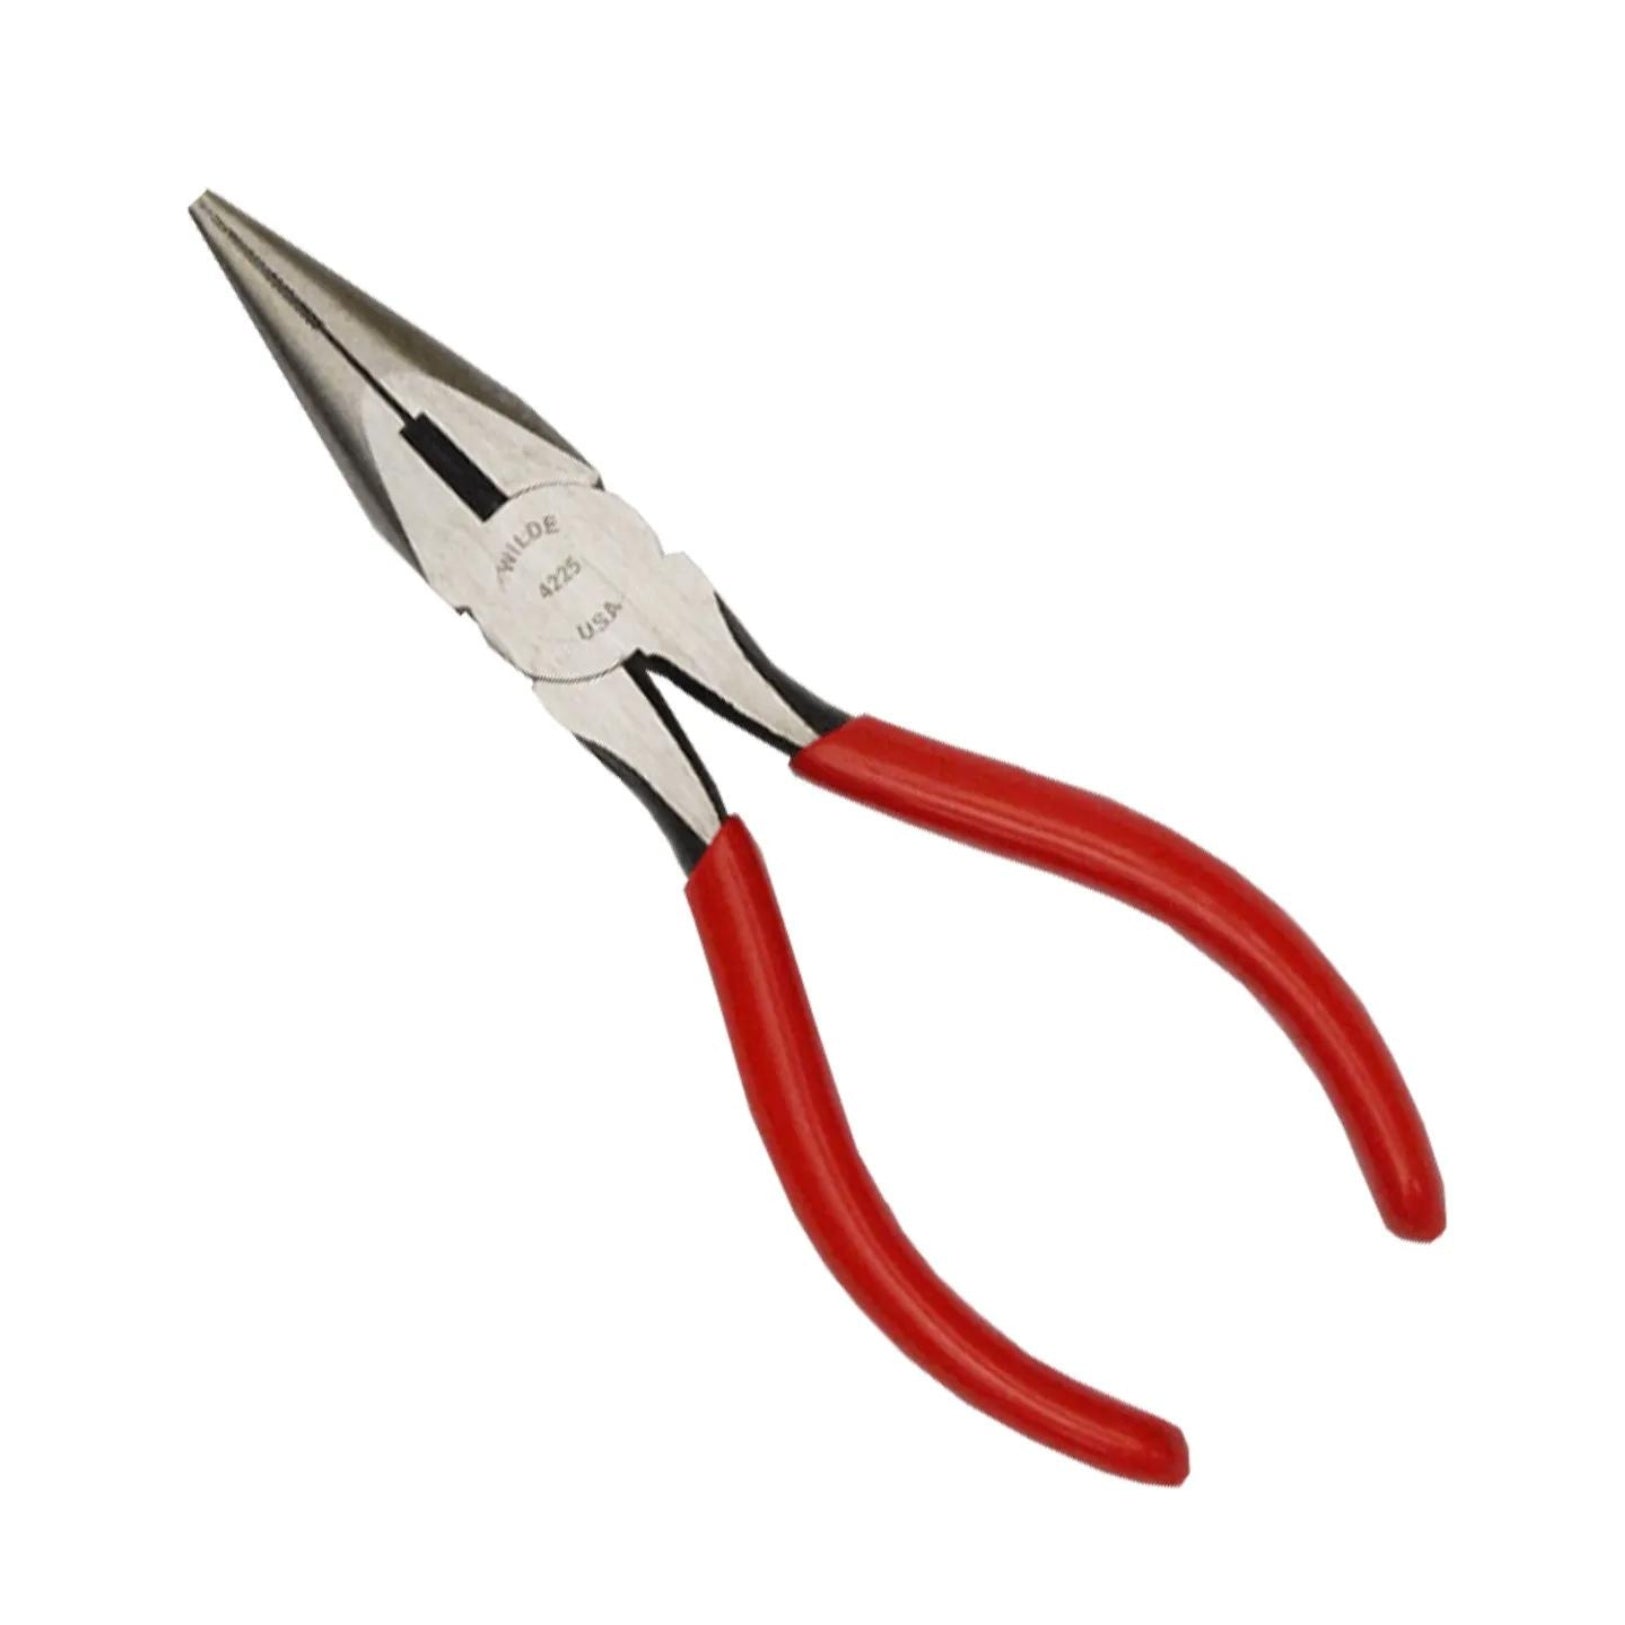  Wilde Tool 6″ Needle Nose Pliers with Cutter | All Security Equipment